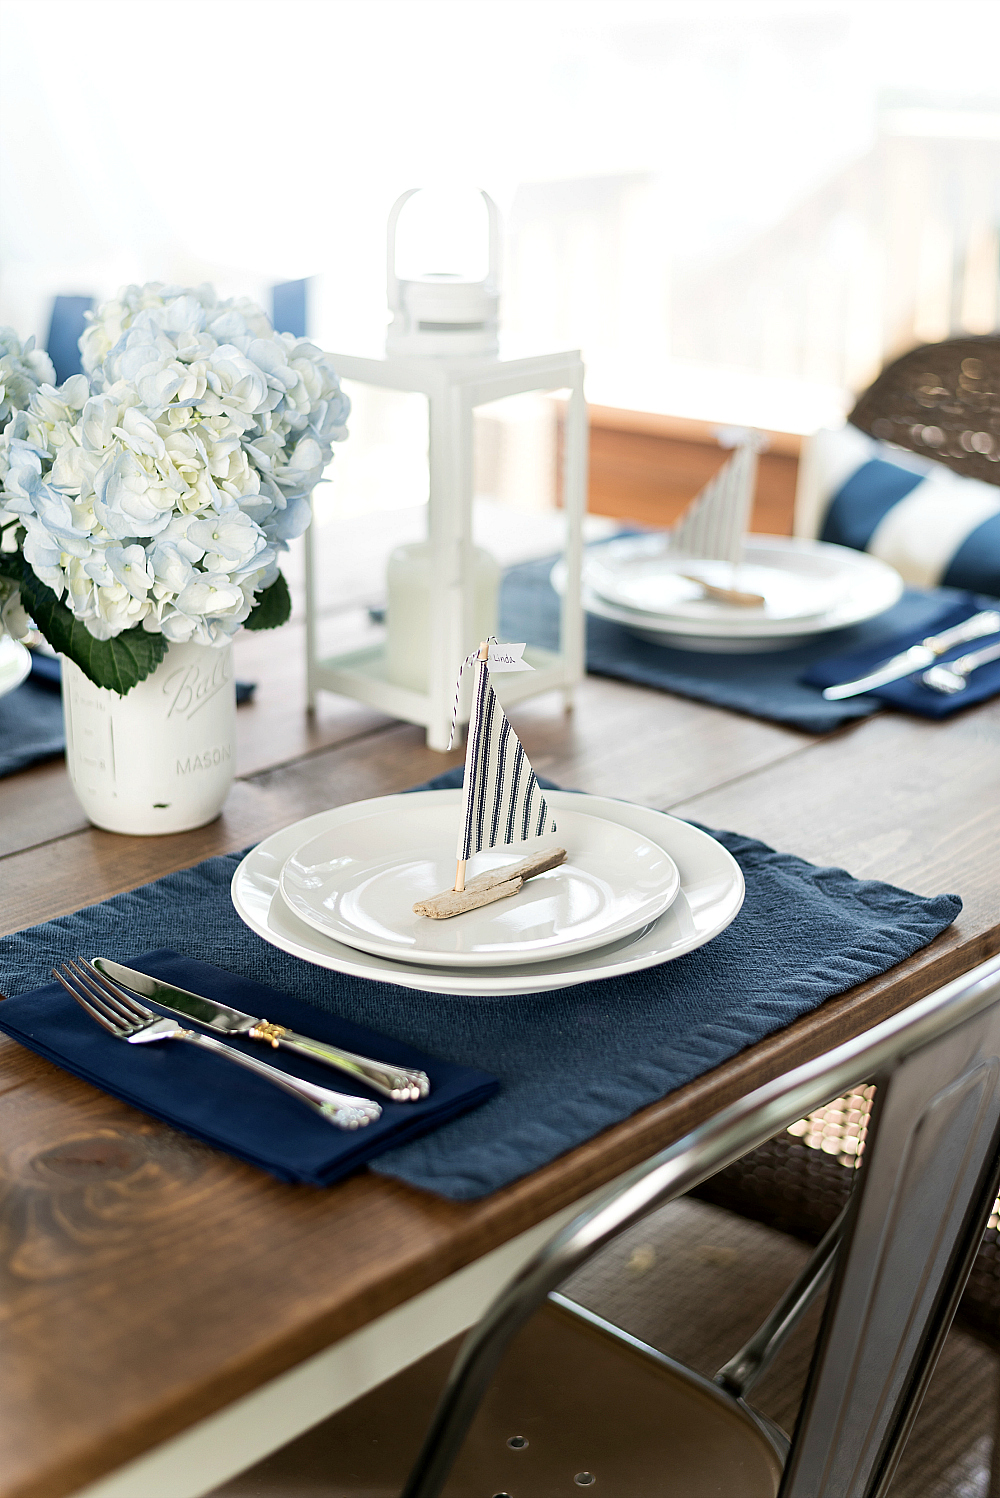 http://www.itallstartedwithpaint.com/wp-content/uploads/2017/09/nautical-table-setting-ideas-summer-table-setting-8-of-42.jpg